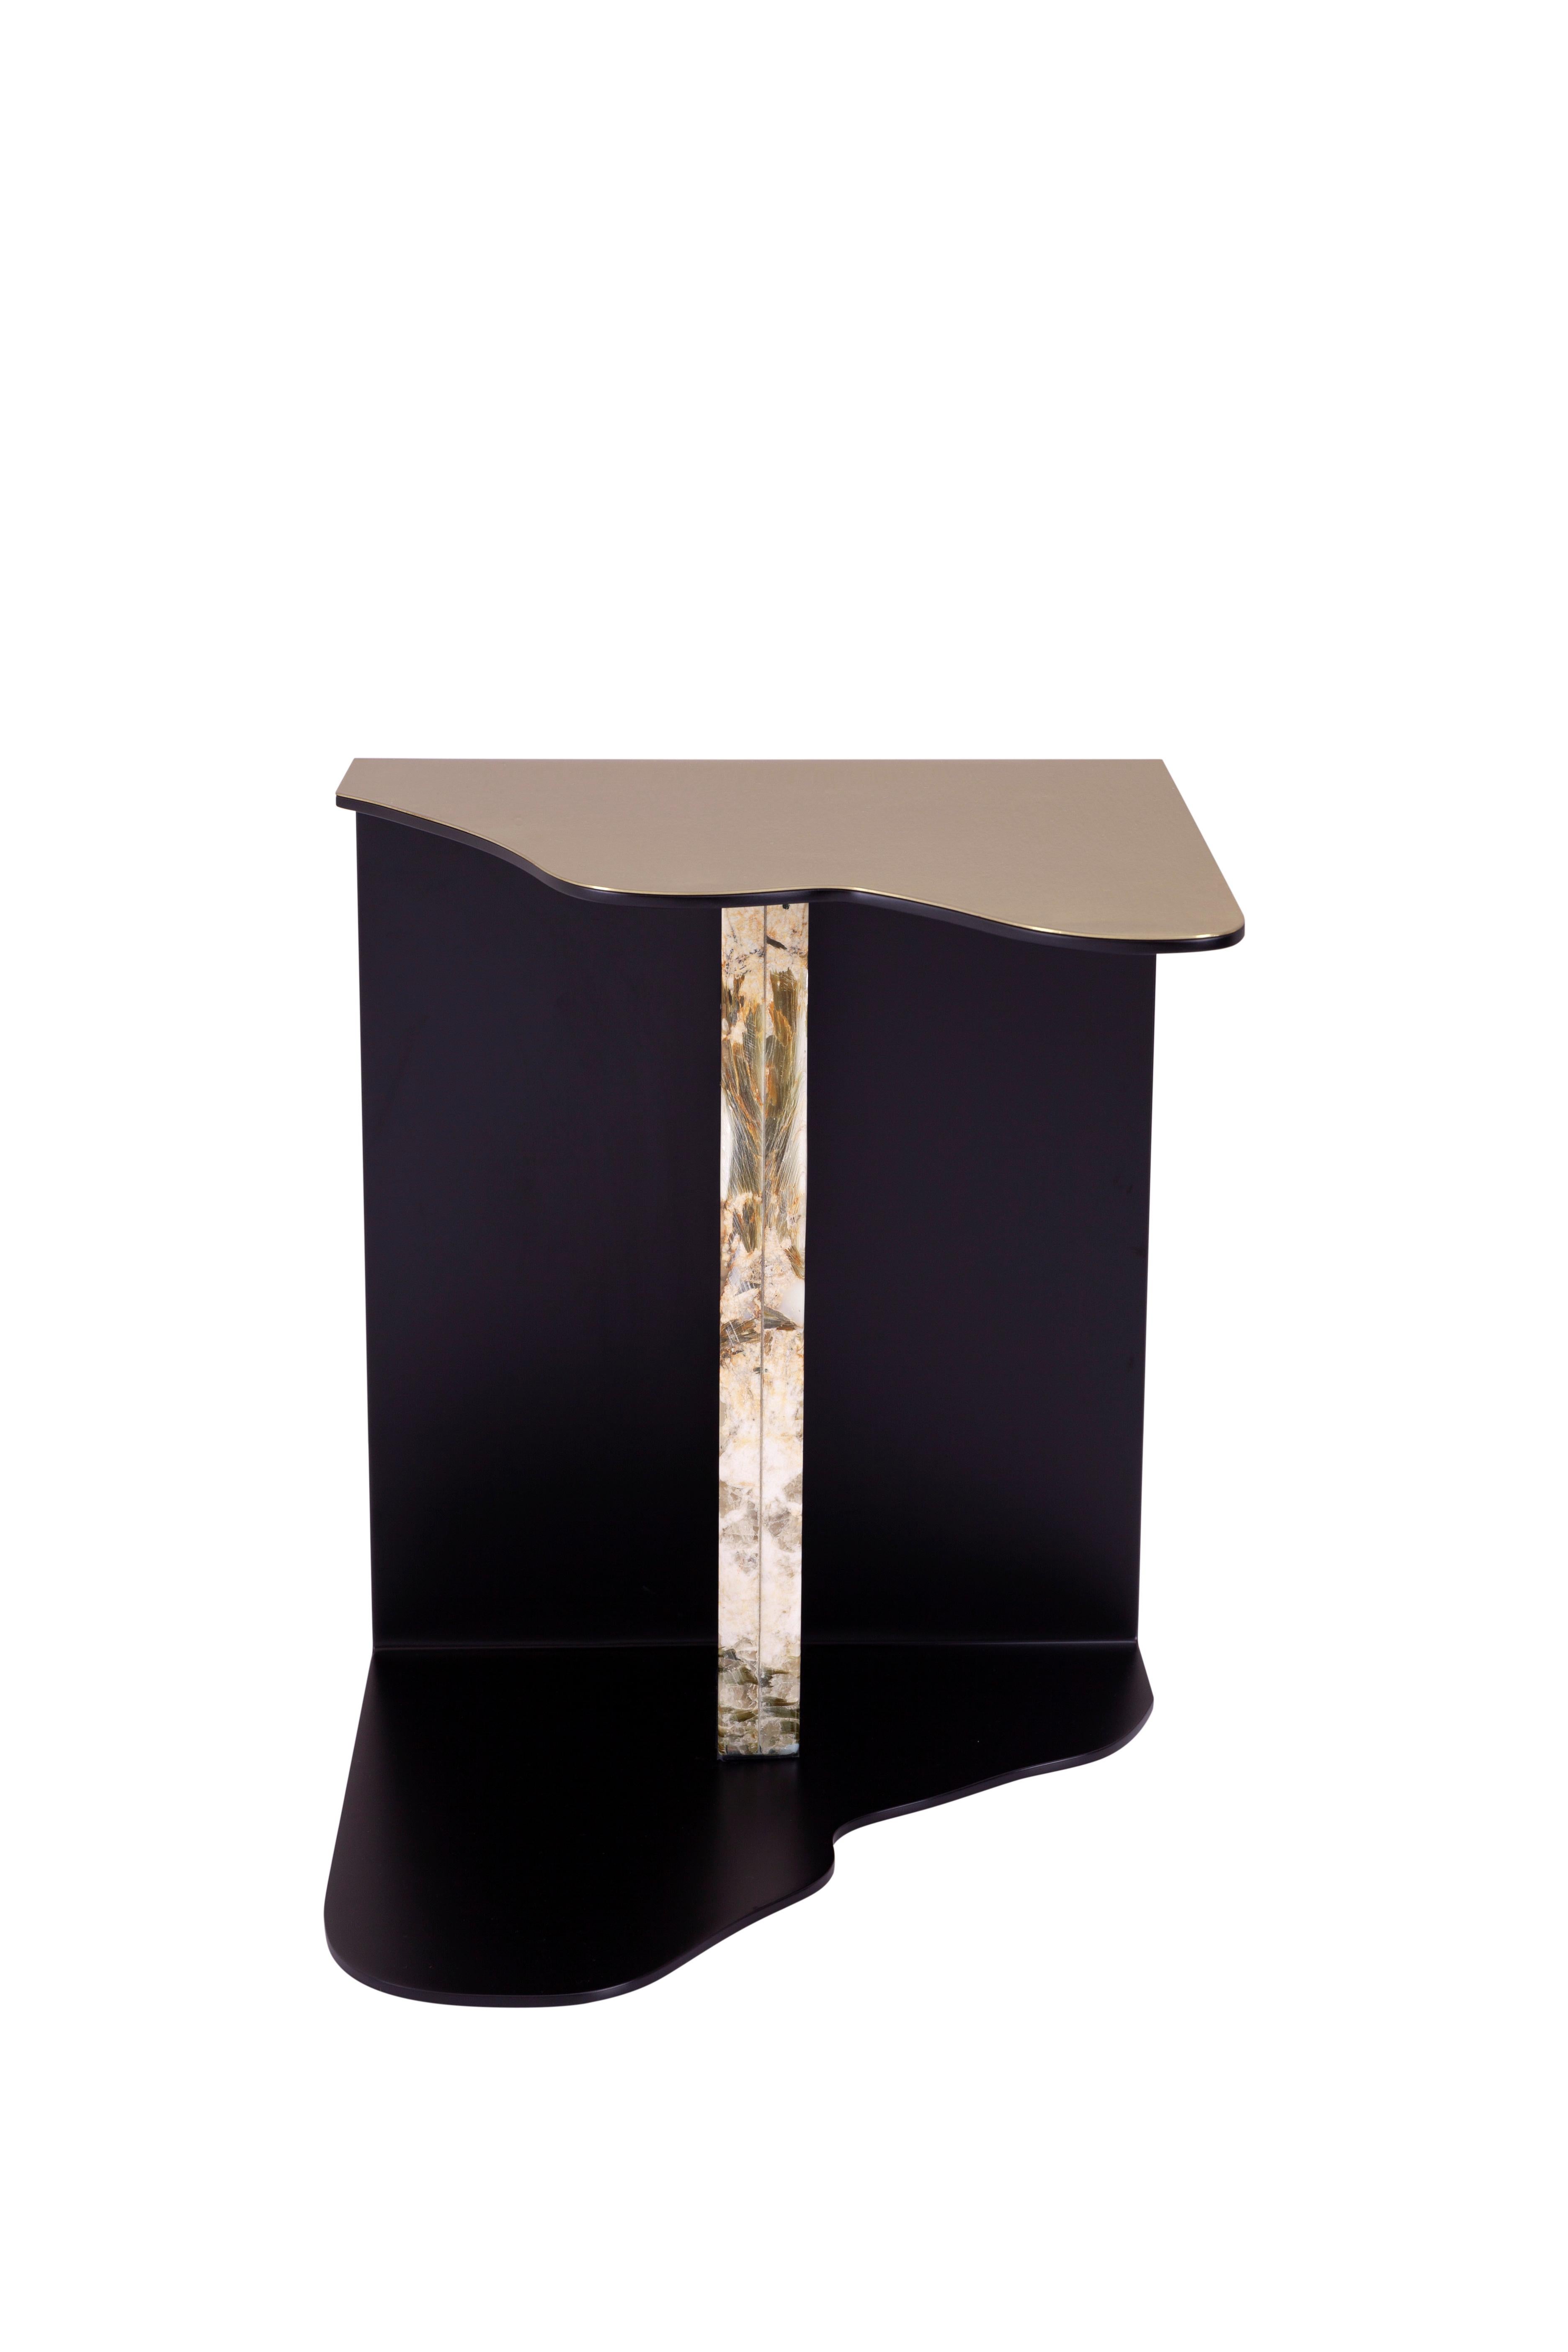 Organic Modern Raw Side Table Patagonia Granite, Handmade Portugal by Greenapple In New Condition For Sale In Lisboa, PT